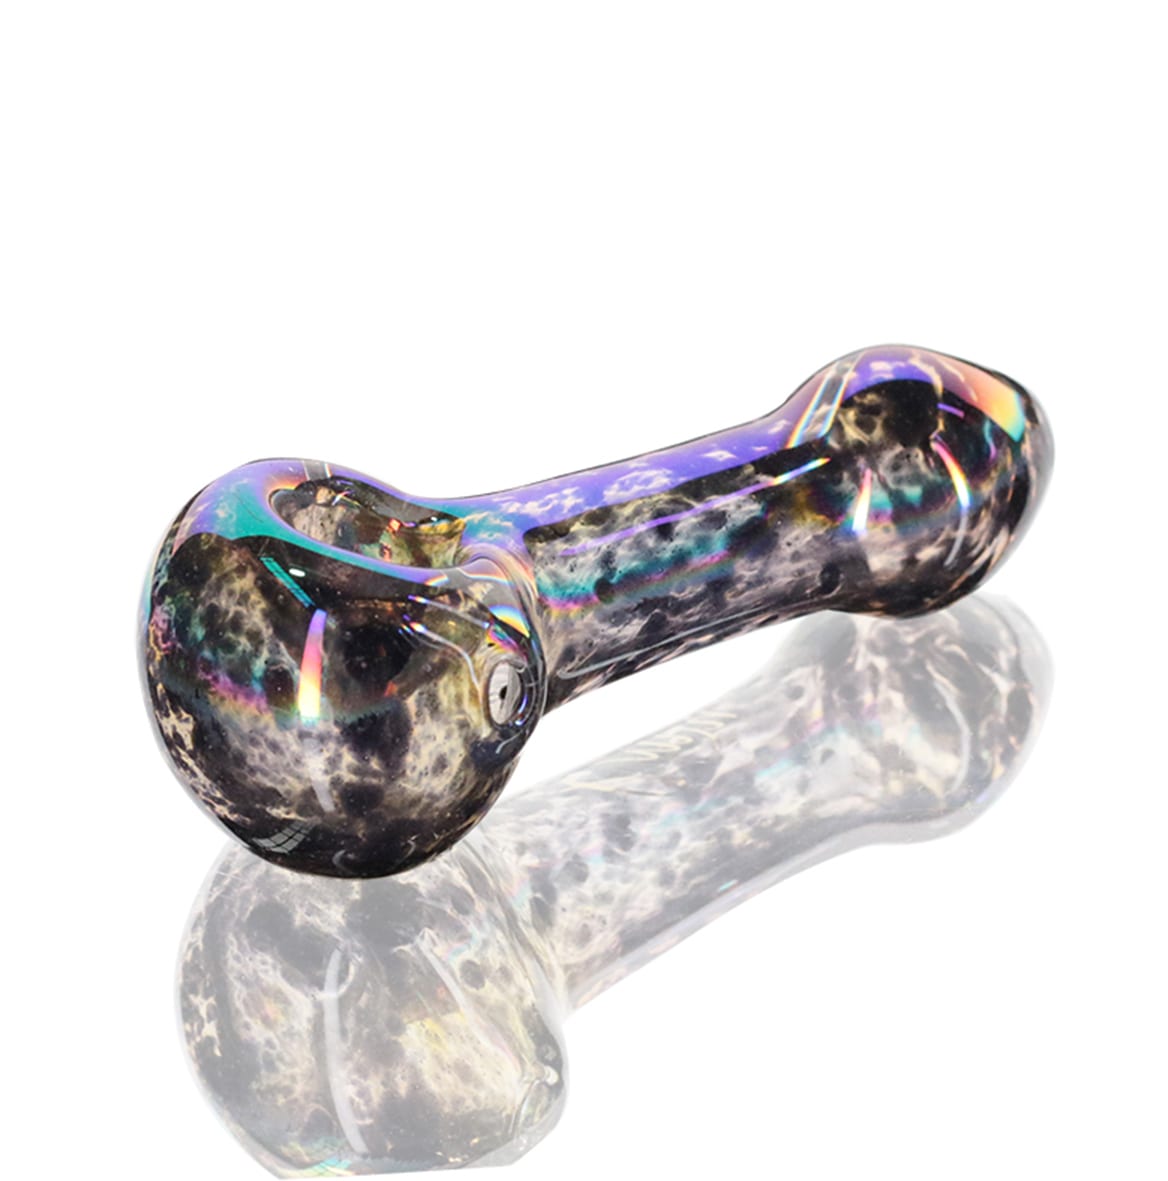 Envy Spoonpipe Speckled Black